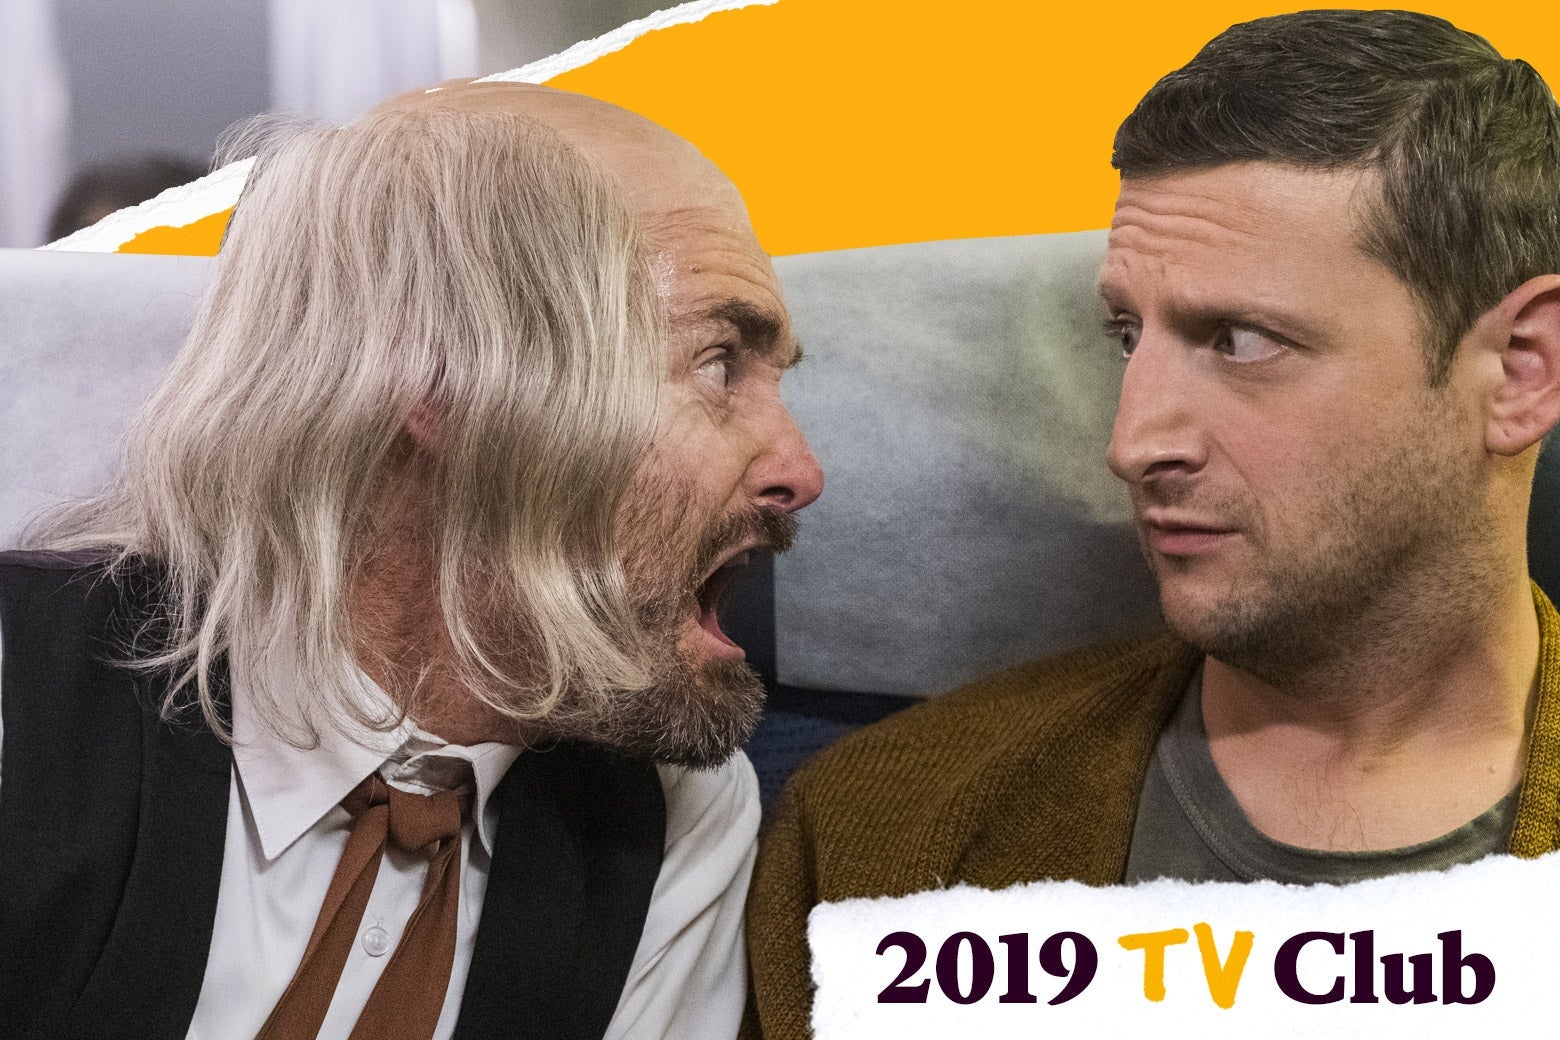 Will Forte cries like a baby in Tim Robinson's face as they both sit on a plane in this still from I Think You Should Leave.